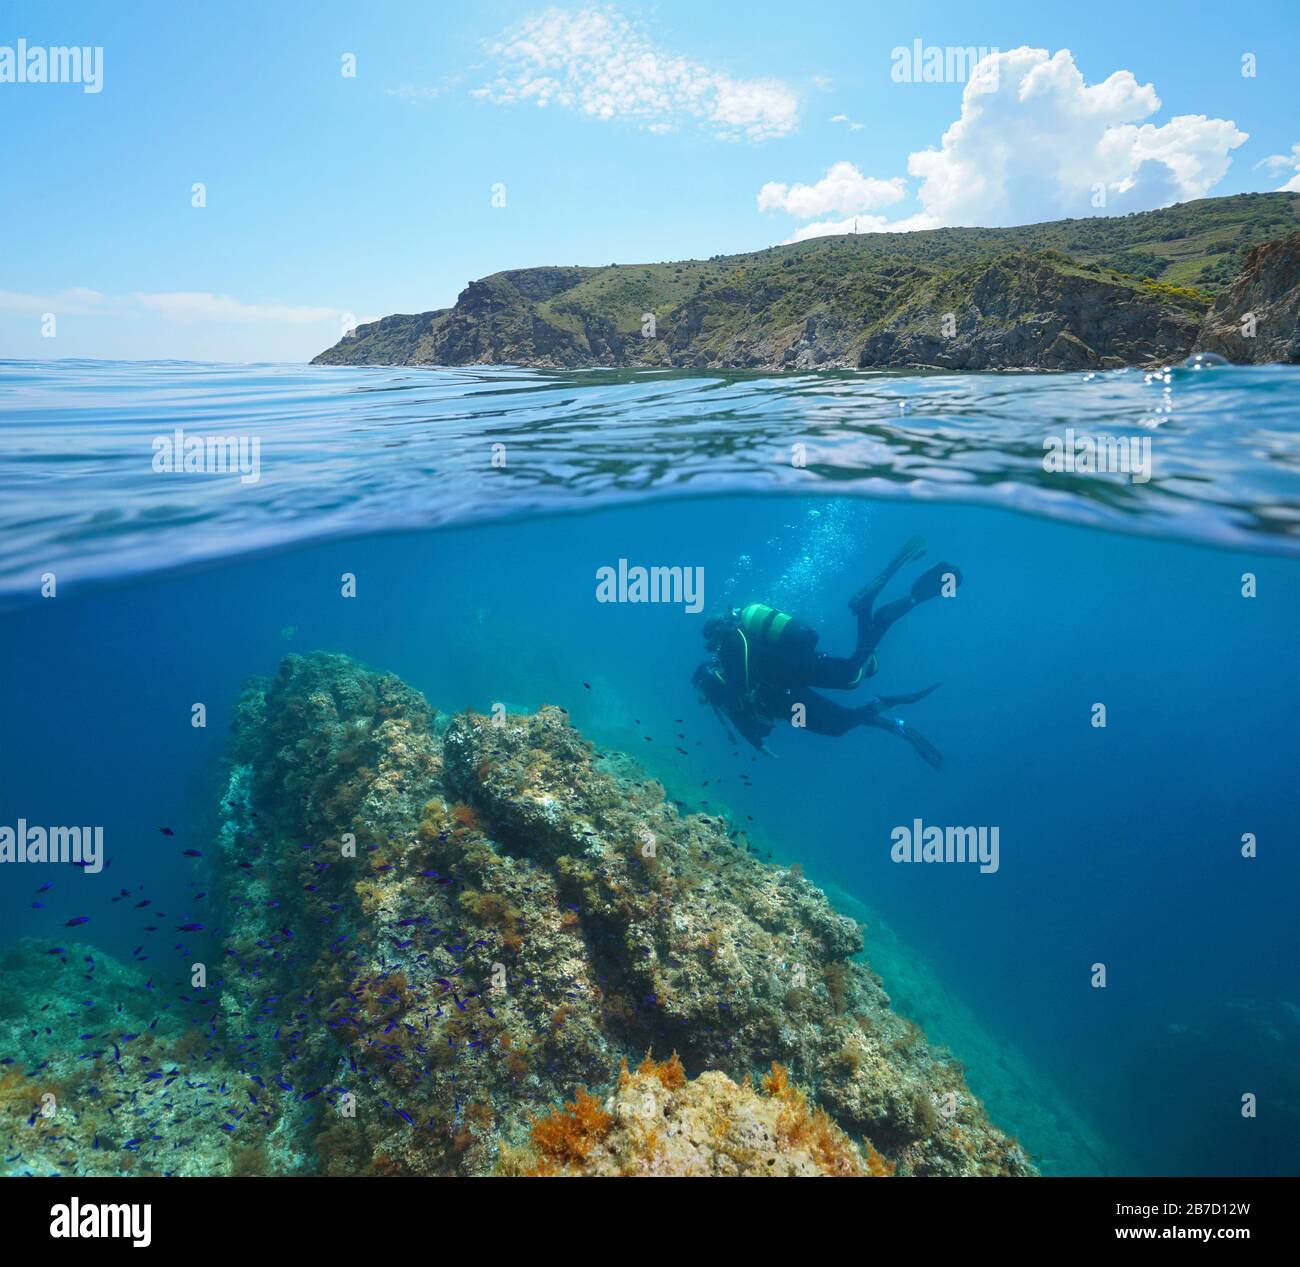 Mediterranean sea scuba diving, two divers underwater and coastline in Marine  reserve of Cerbere Banyuls, split view over under water surface, France  Stock Photo - Alamy